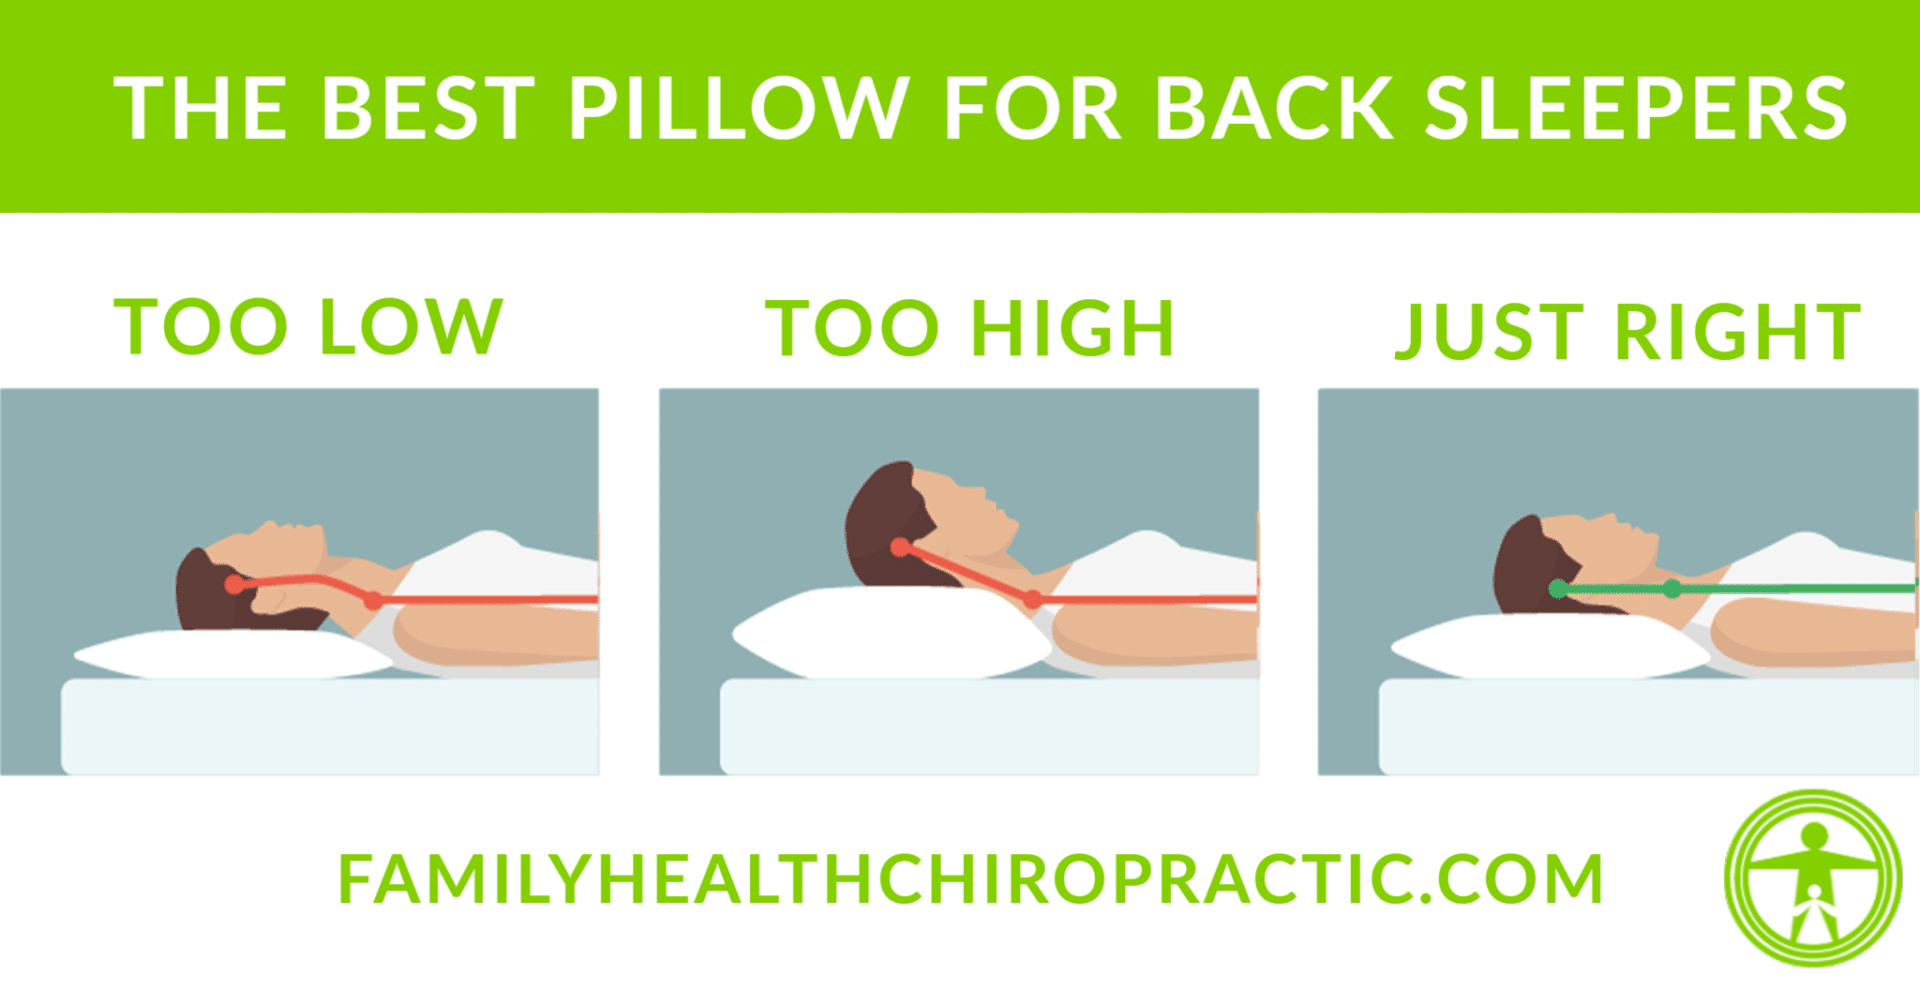 https://www.familyhealthchiropractic.com/wp-content/uploads/the-best-pillow-for-back-sleepers.png